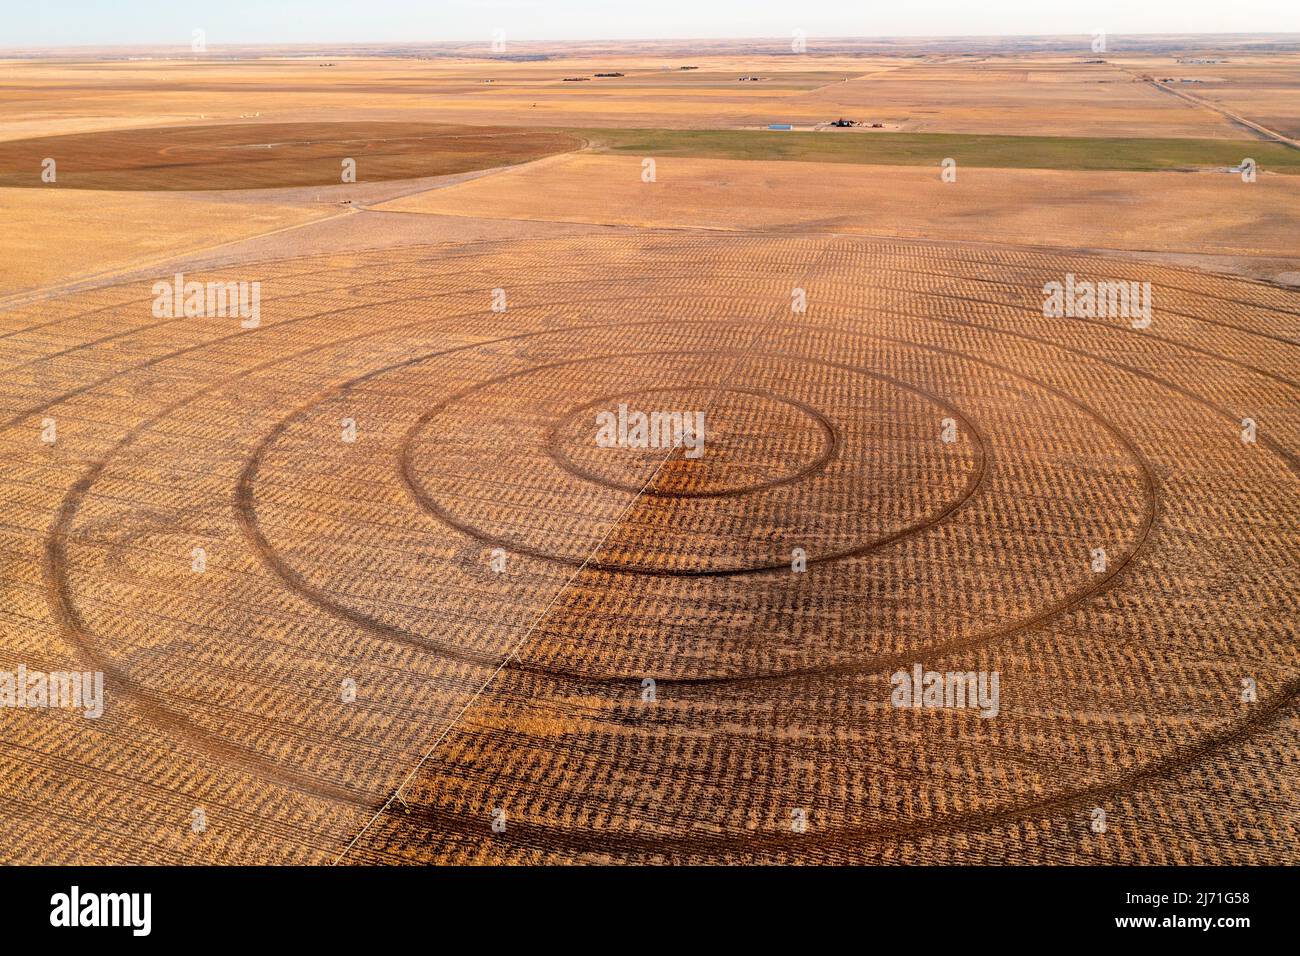 Turpin, Oklahoma - Center pivot irrigation equipment in early spring on a farm in the Oklahoma panhandle. Stock Photo